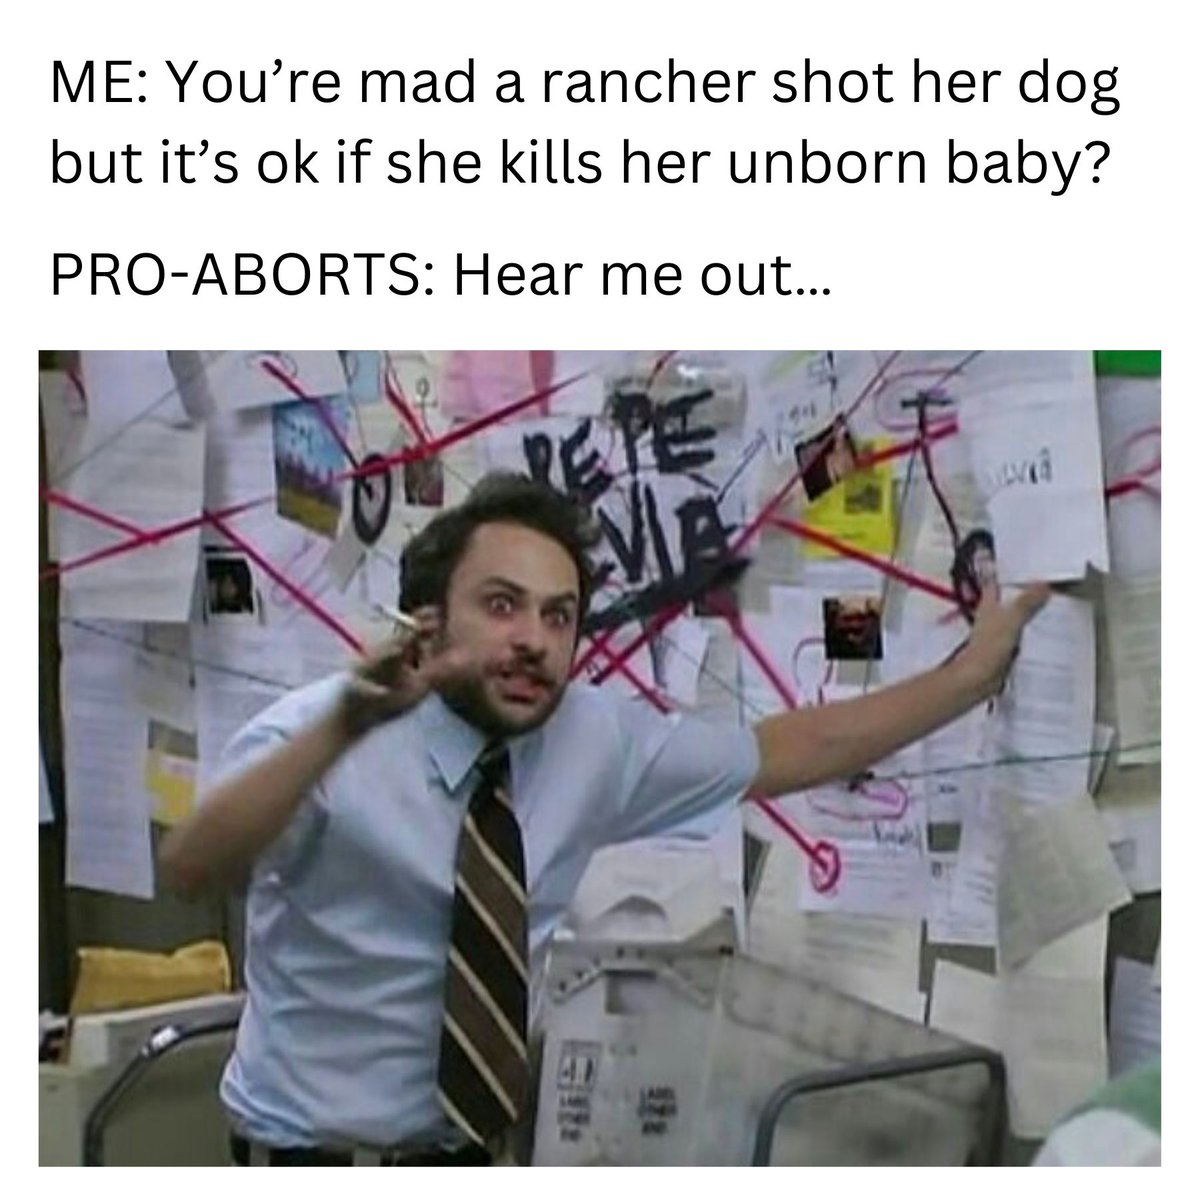 But if she'd shot her unborn baby, proaborts wouldn't mind at all...